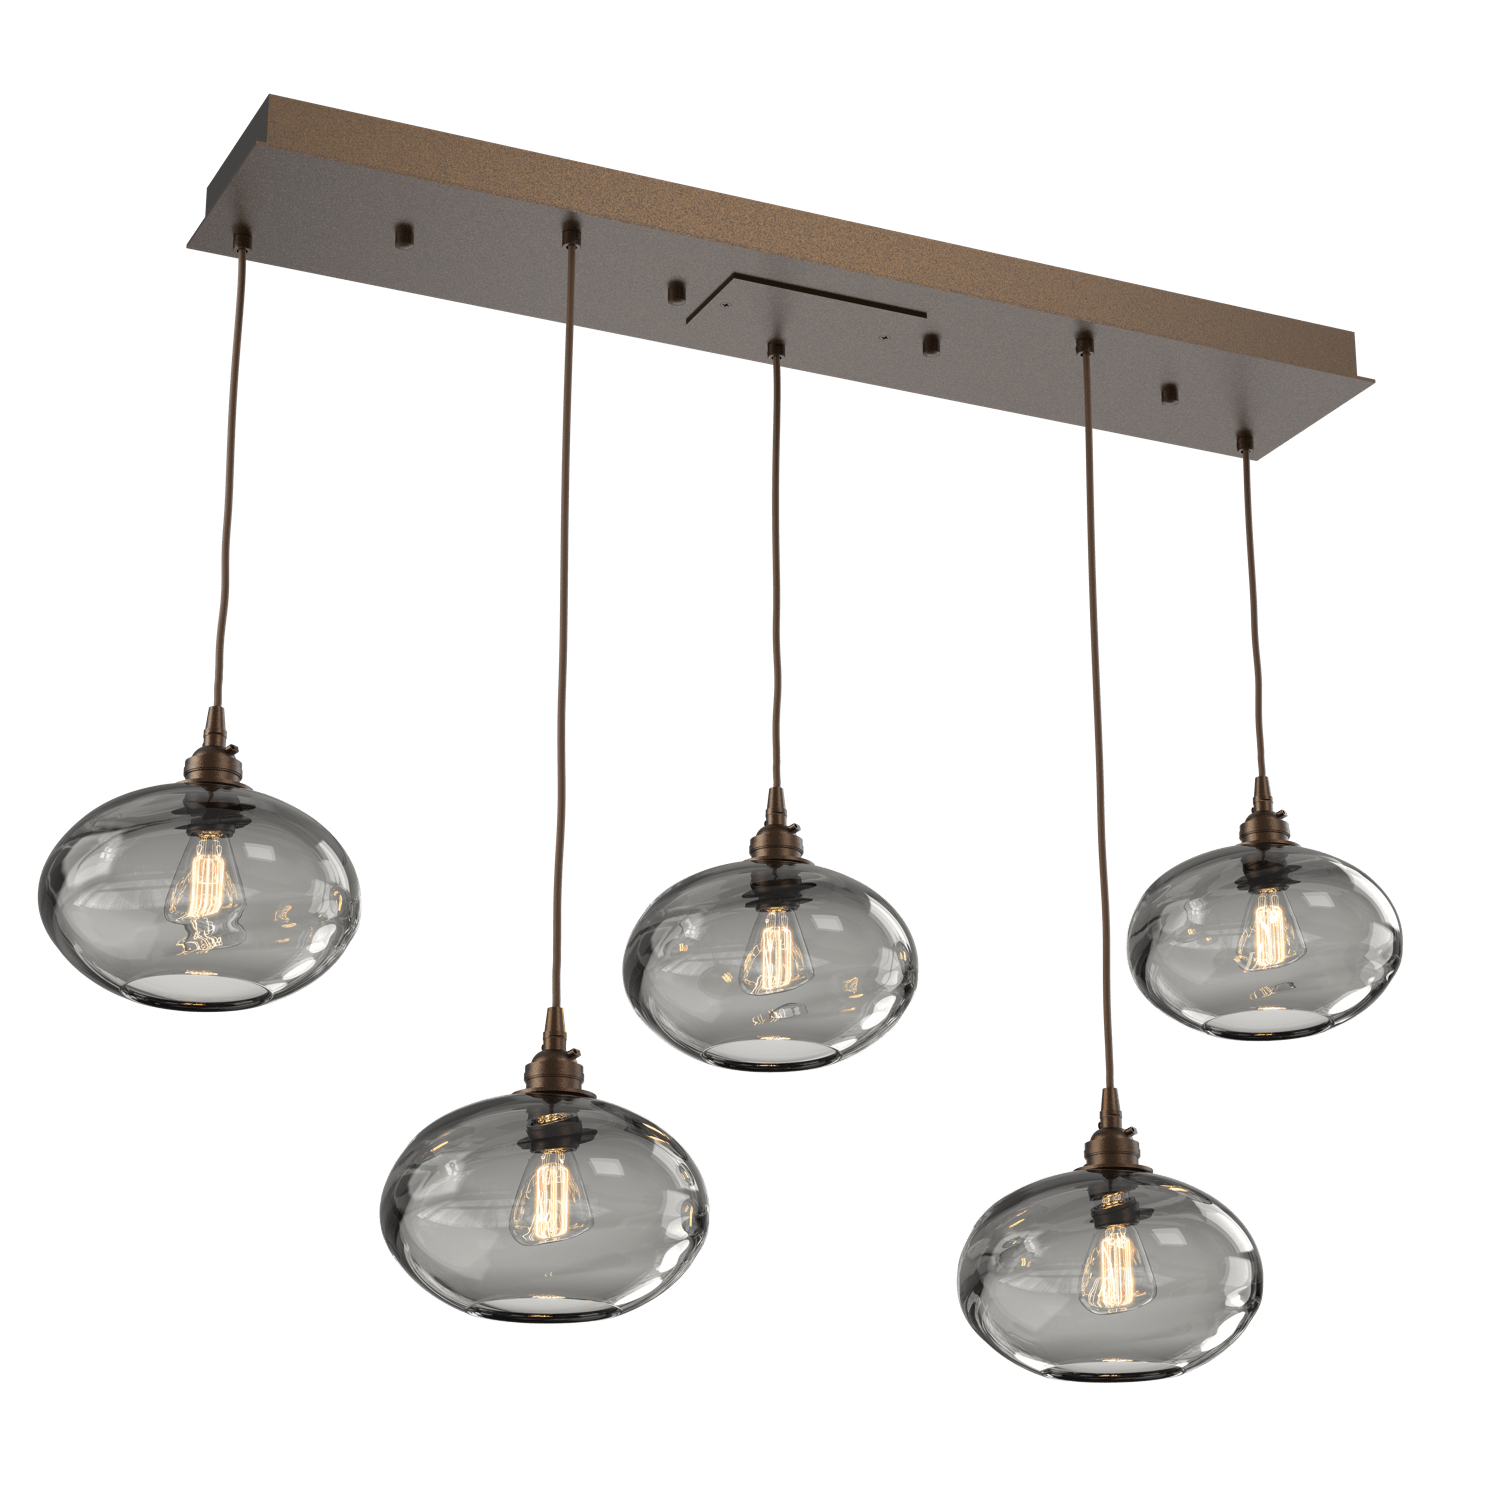 PLB0036-05-FB-OS-Hammerton-Studio-Optic-Blown-Glass-Coppa-5-light-linear-pendant-chandelier-with-flat-bronze-finish-and-optic-smoke-blown-glass-shades-and-incandescent-lamping